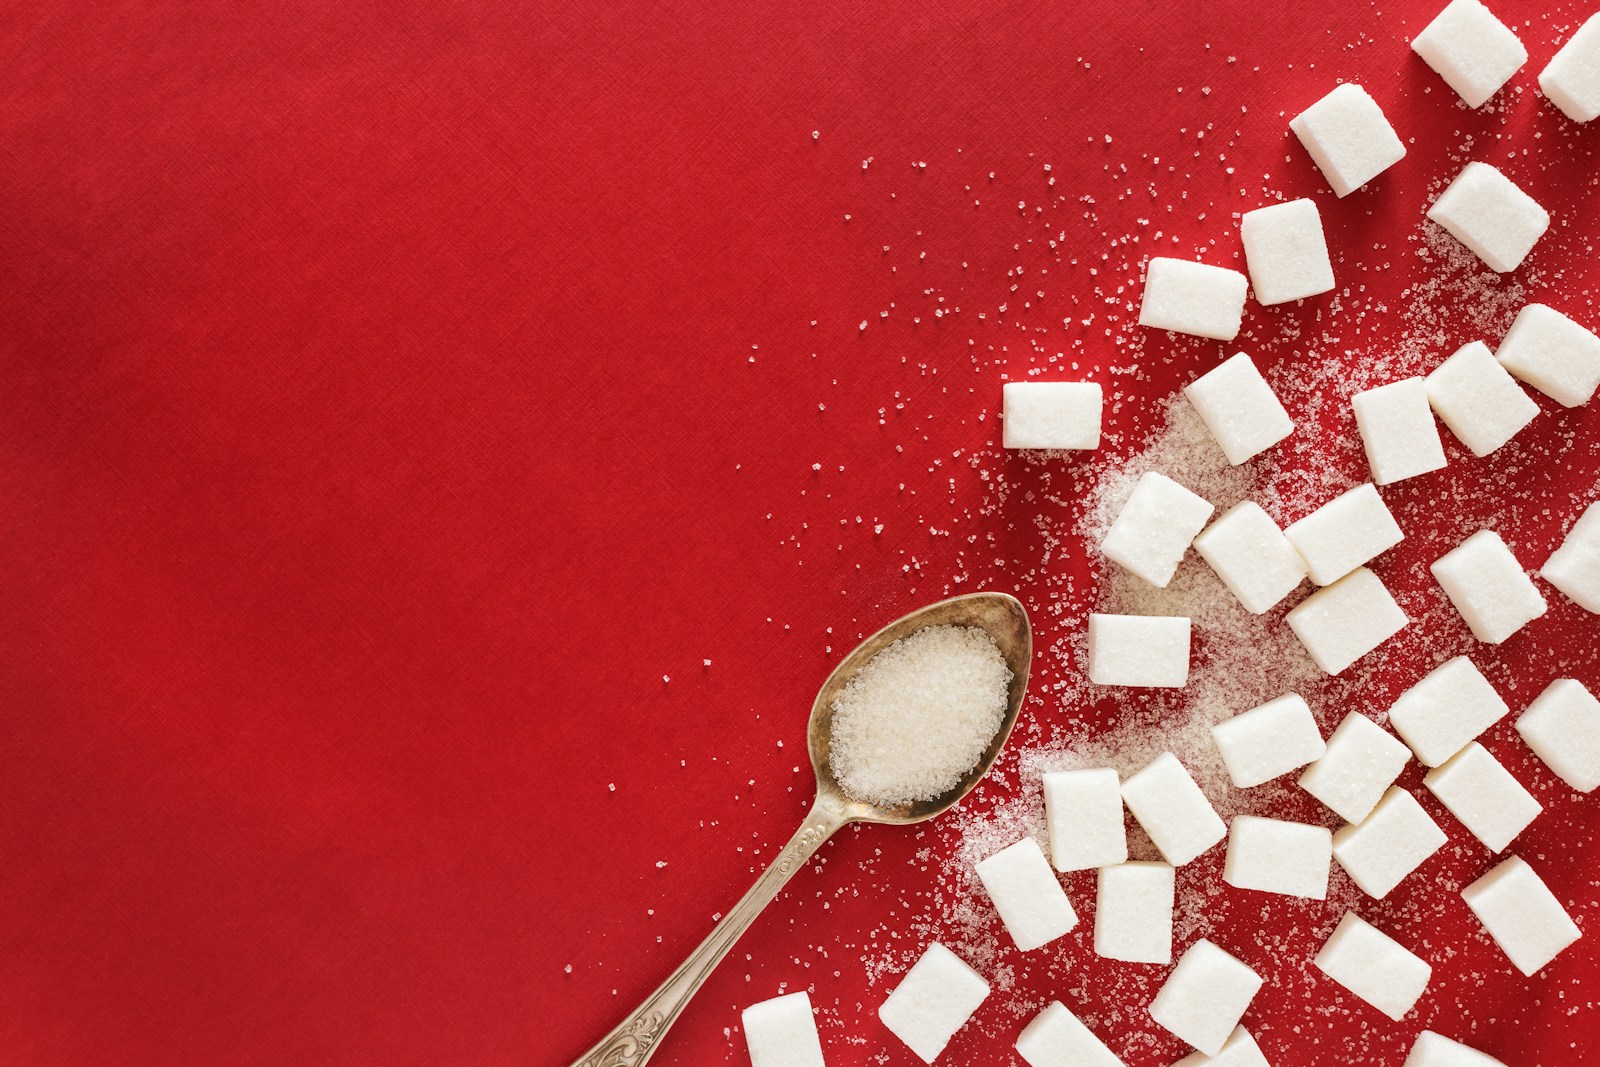 sugar cubes and a spoon on a red surface